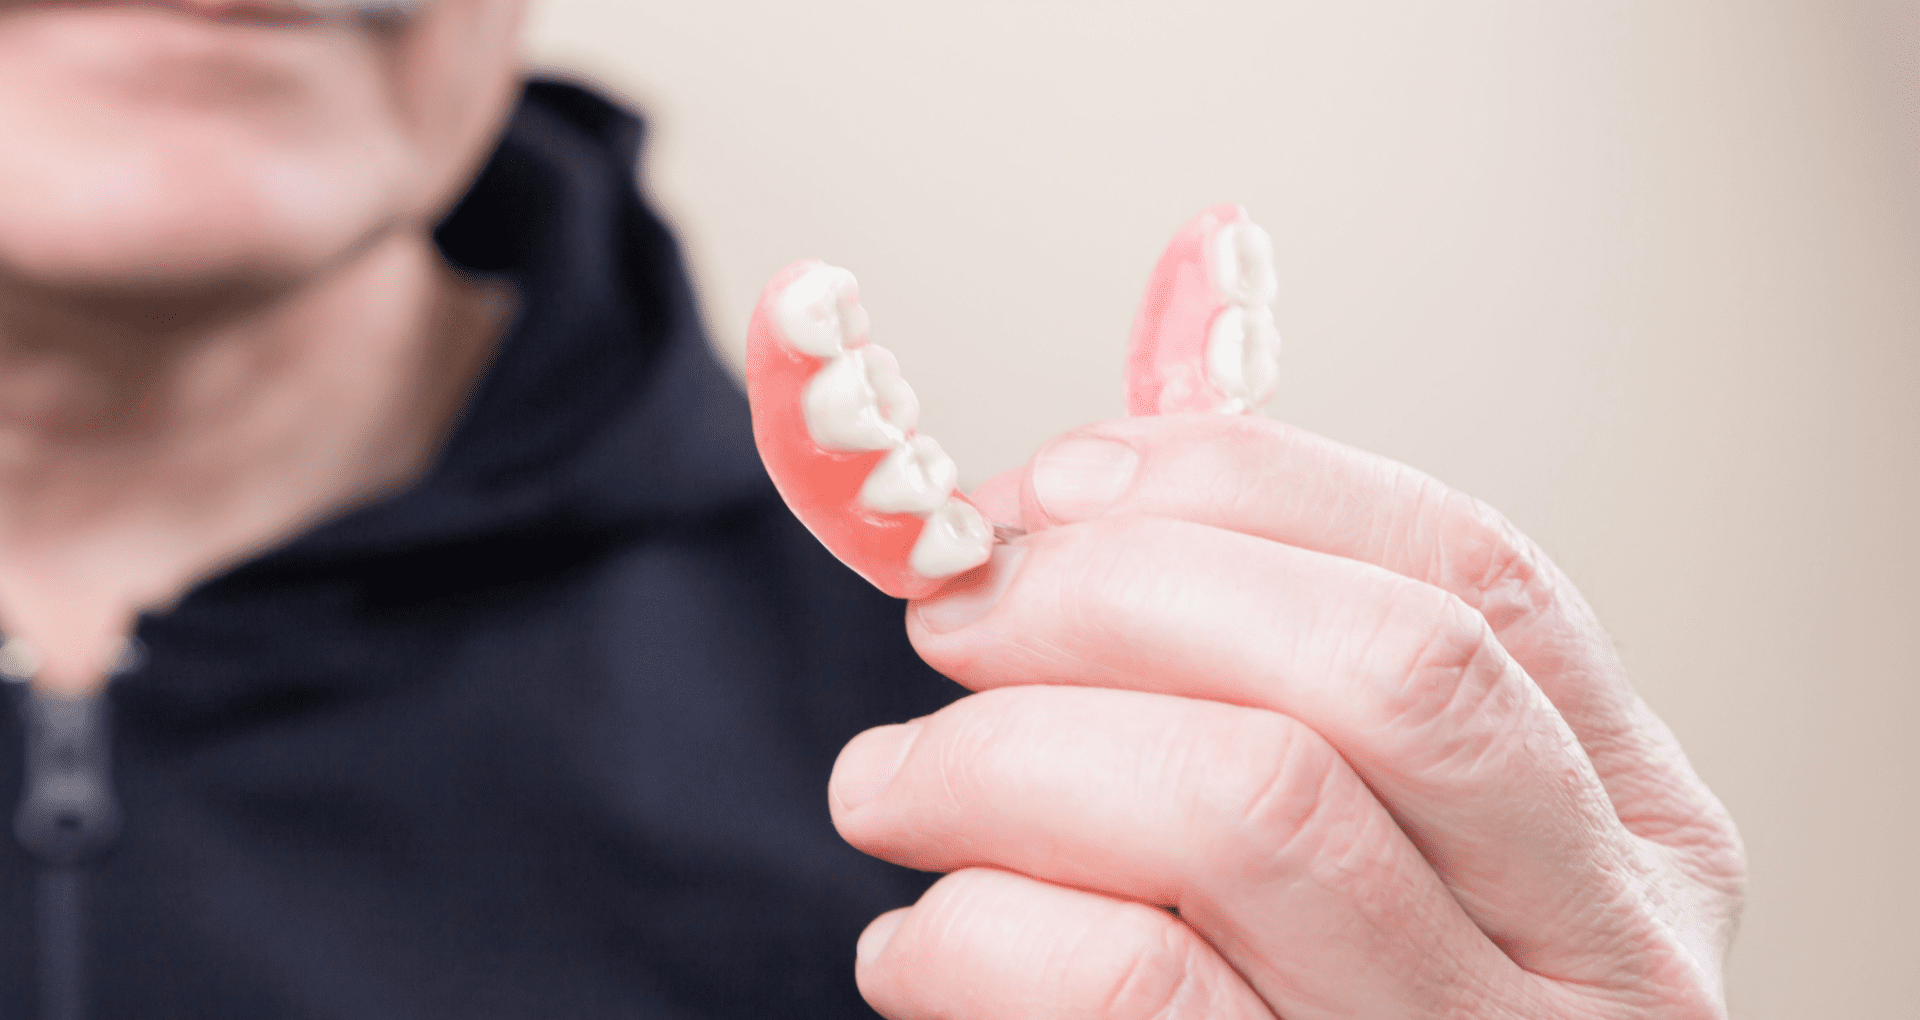 appropriate age dentures, denture, denture for young